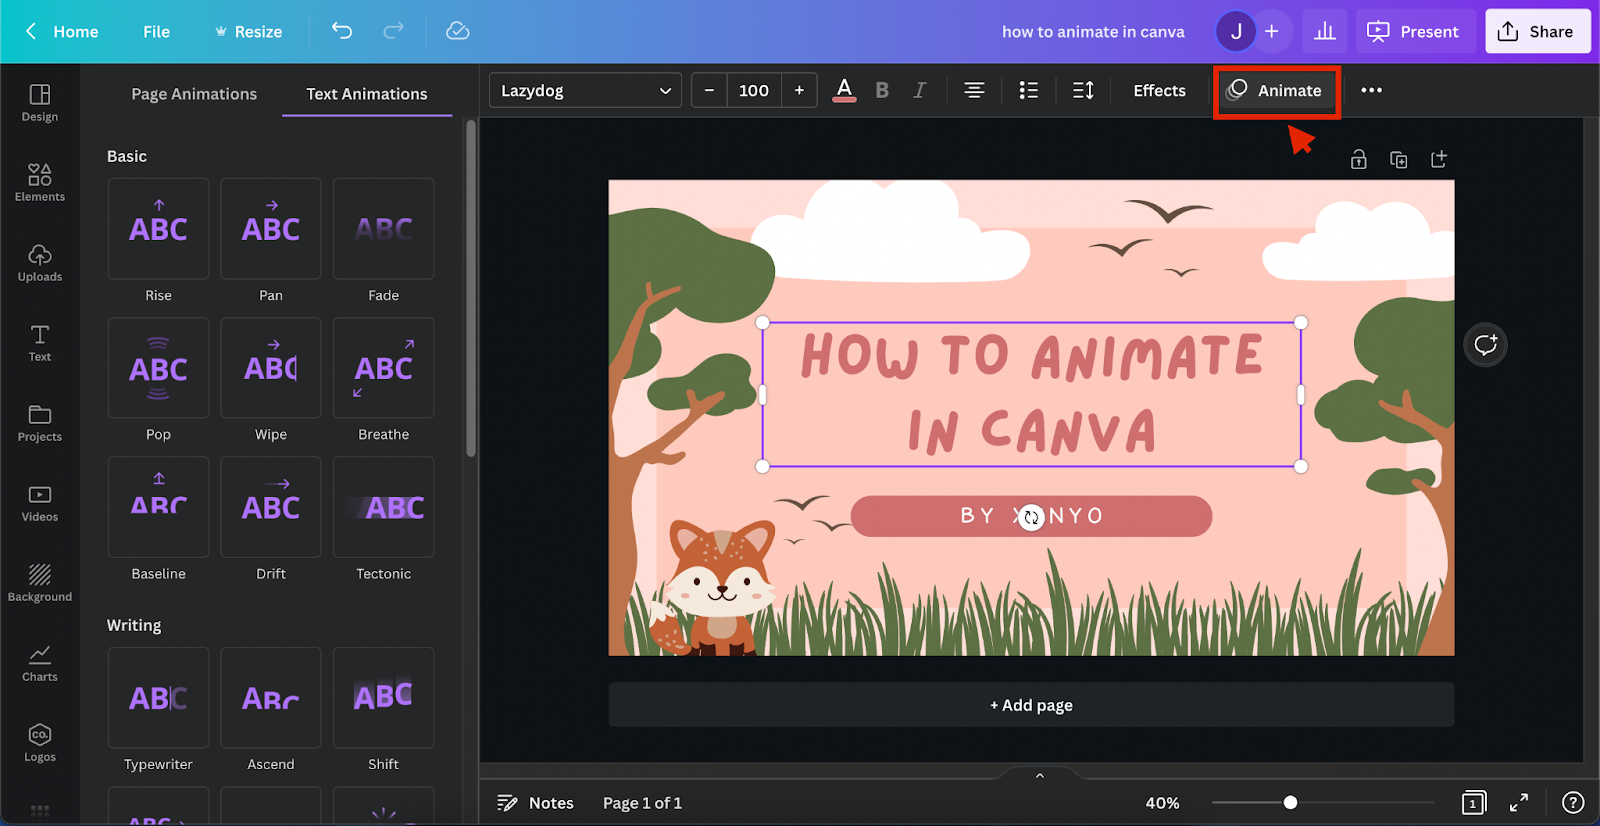 How to make a GIF in CANVA [CANVA PRO] 